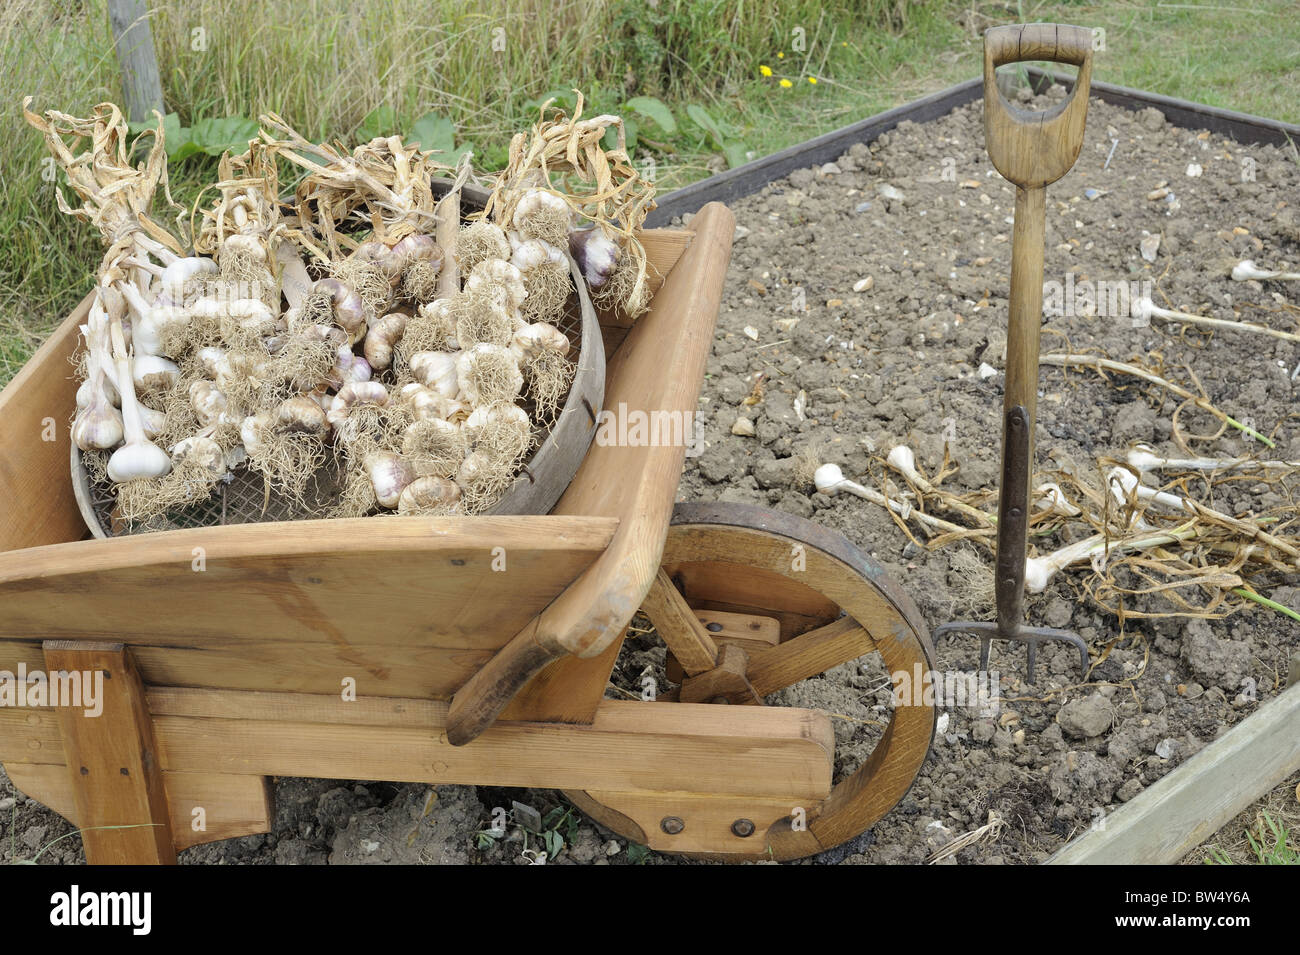 HOME GROWN GARLIC, FRESHLY HARVESTED PLACED ON OLD GARDEN SEIVE IN WOODEN WHEELBARROW, NORFOLK, UK, JULY Stock Photo